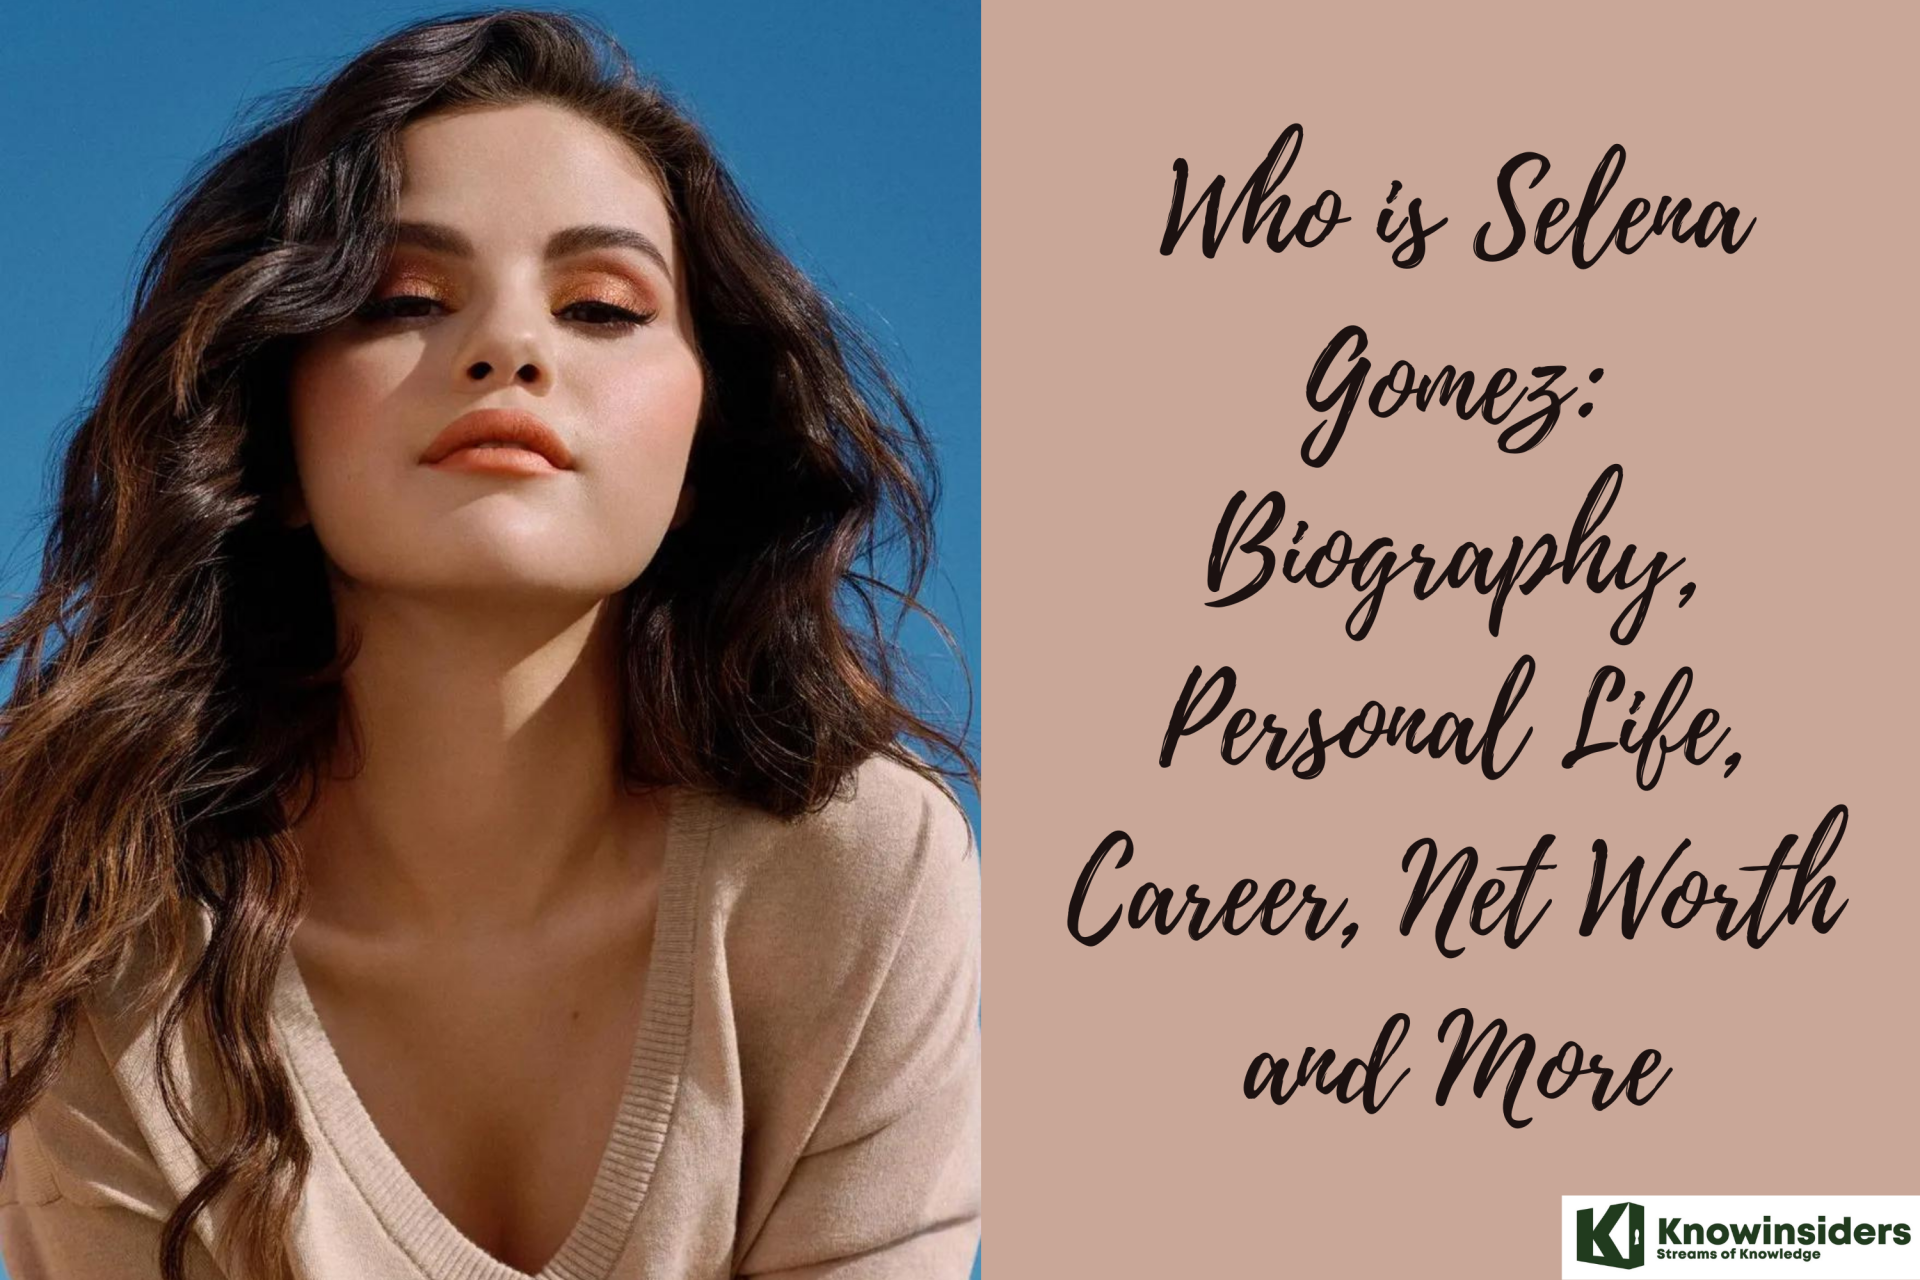 Who is Selena Gomez: Biography, Personal Life, Career, Net Worth and More